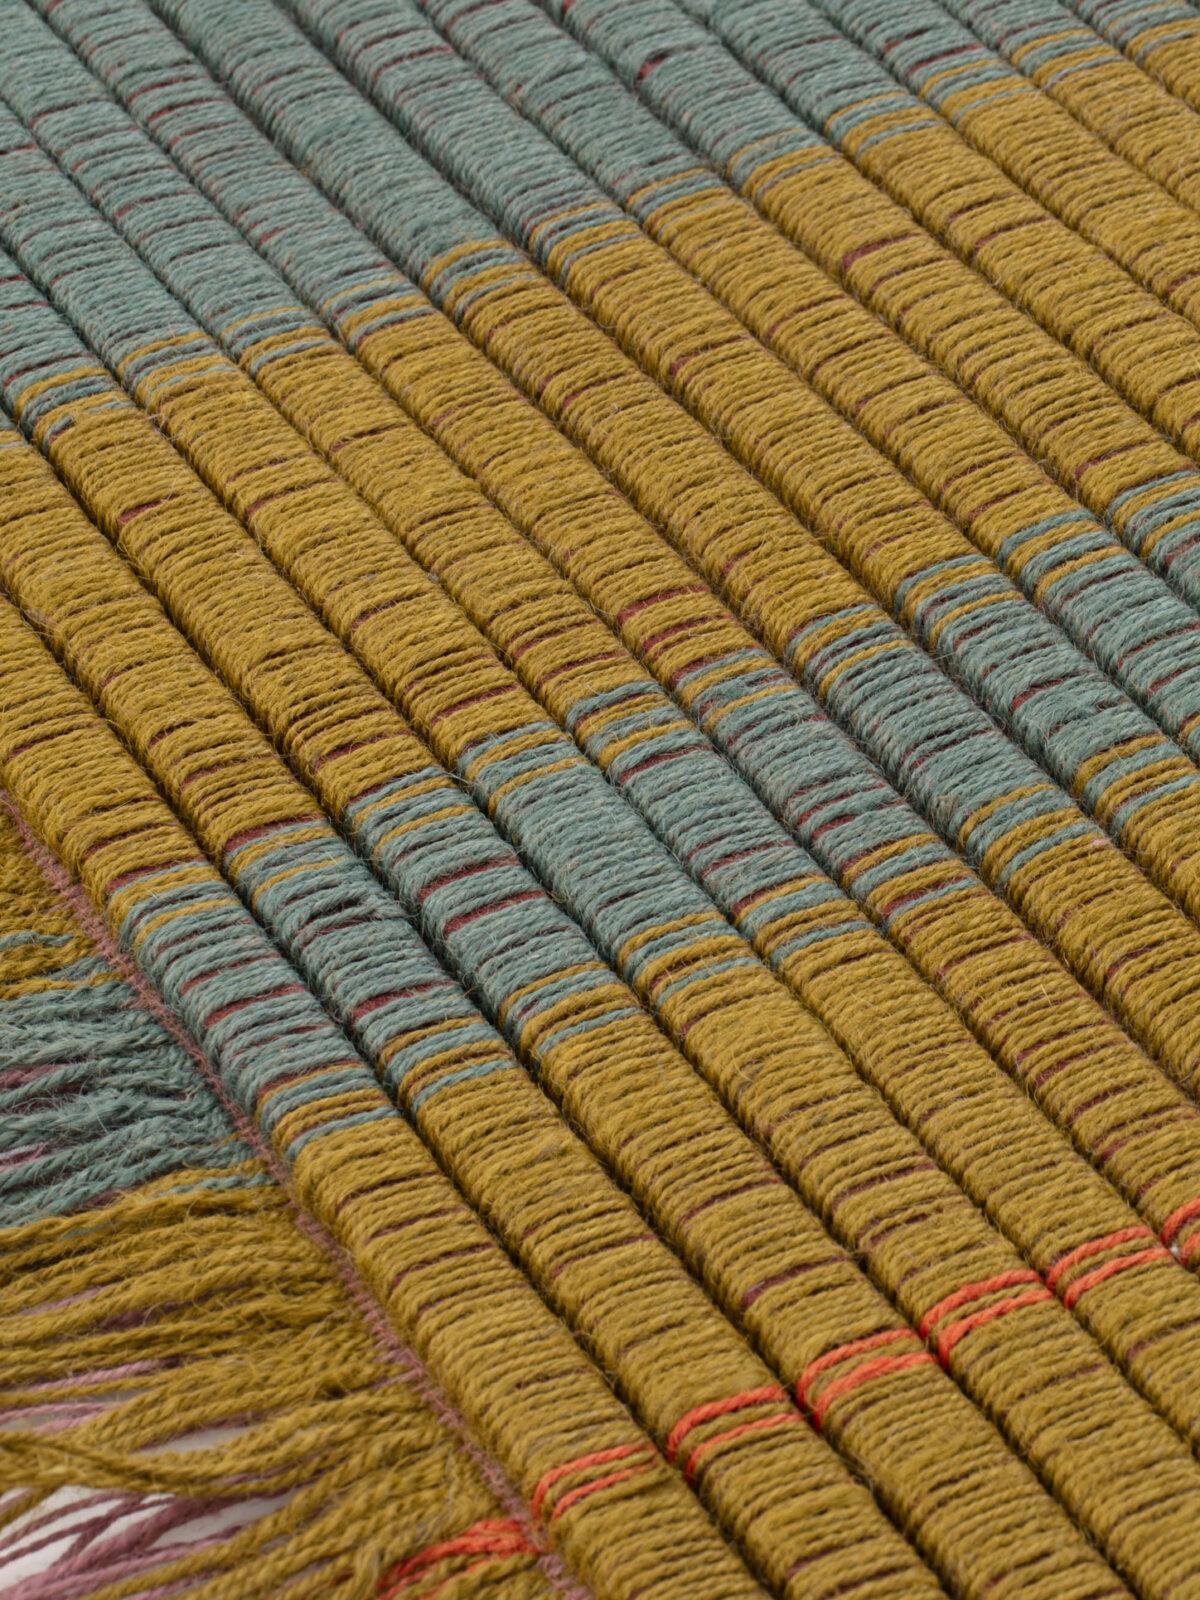 Omote is a collection of rugs designed by designer Mae Engelgeer for the CC-Tapis brand. The Omote rug collection is made of jute and felted wool made by hand loom.

One of the distinctive elements of the Omote collection are the bangs on the short